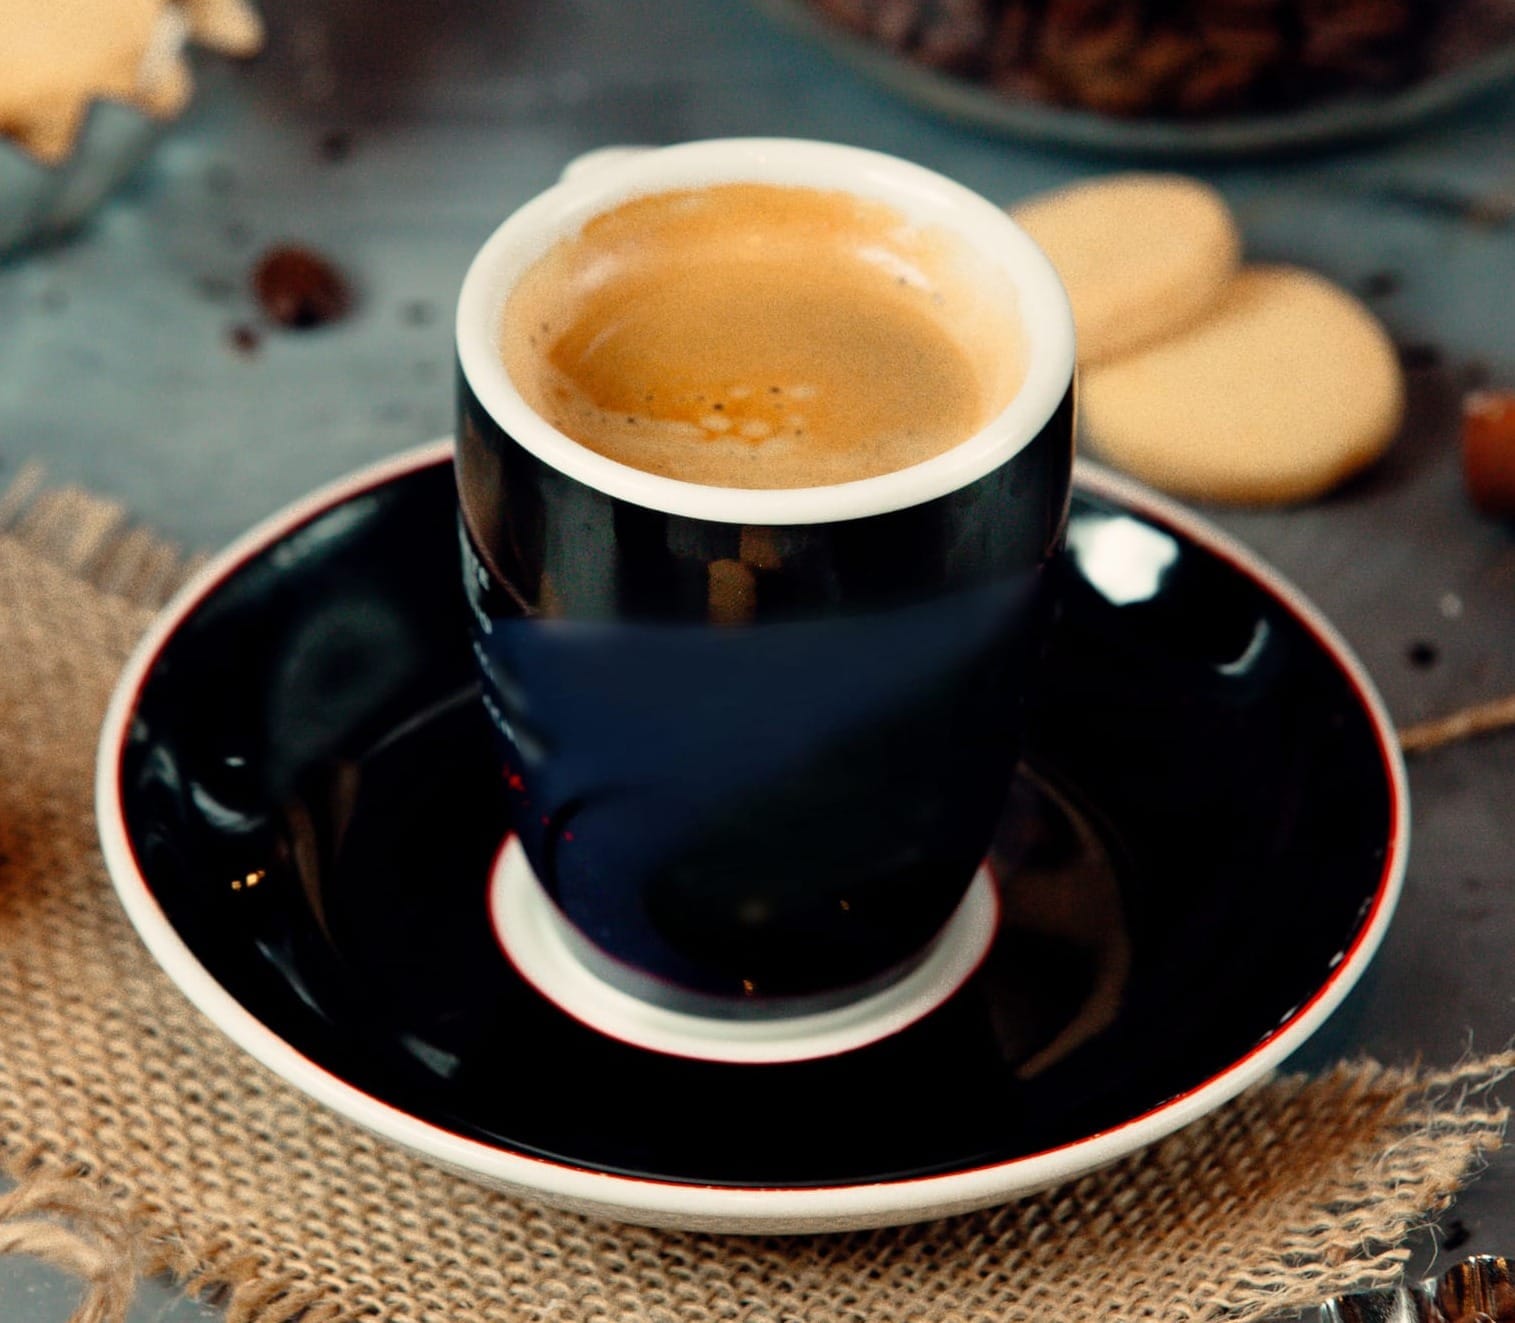 What Is an Americano? How Is It Different From Brewed Coffee?